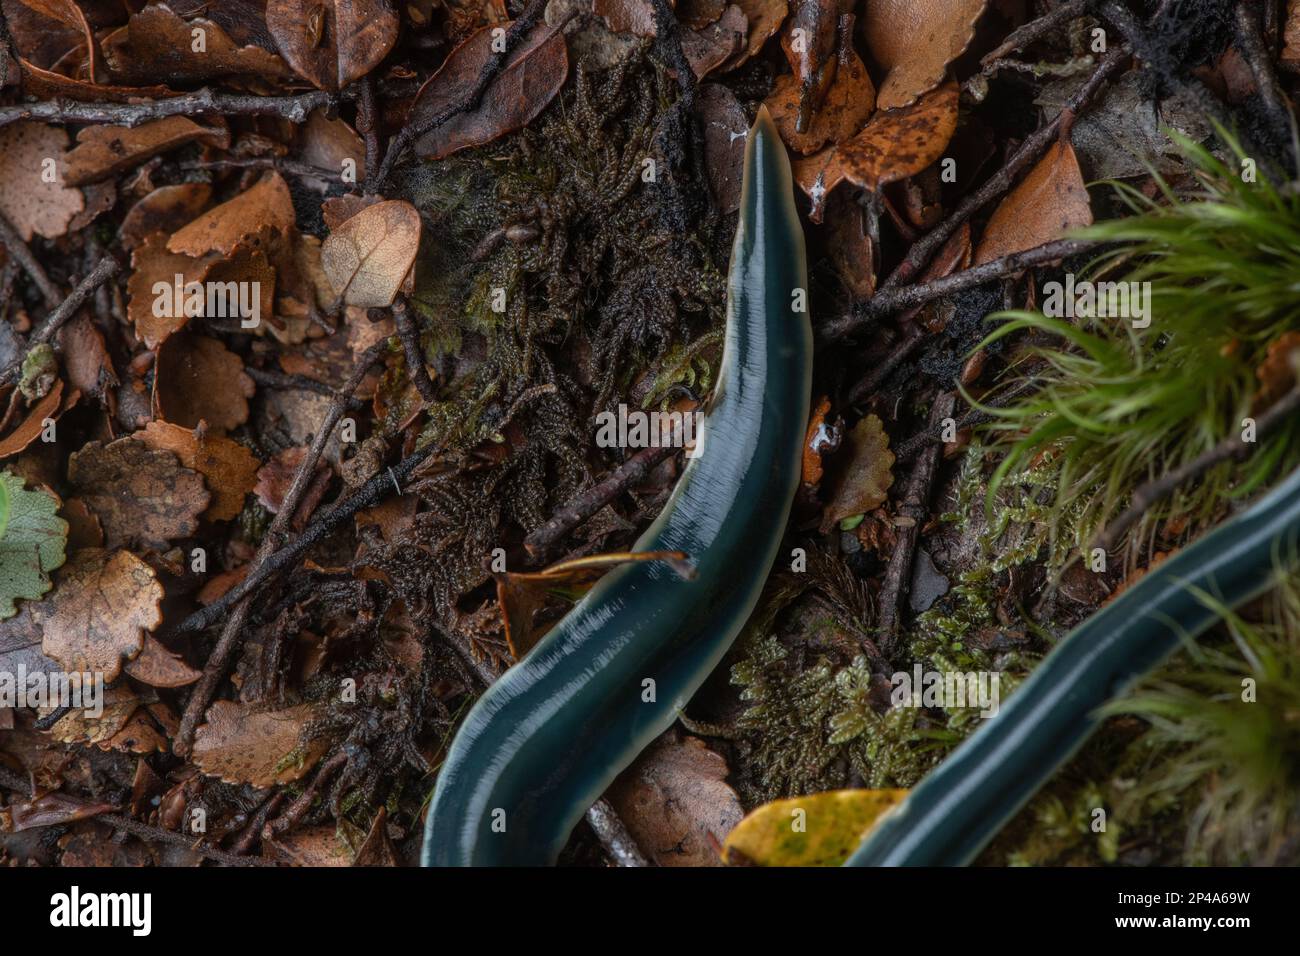 A terrestrial planarian or flatworm in the Australopacifica genus from Nelson Lakes National park in Aotearoa New Zealand. Stock Photo